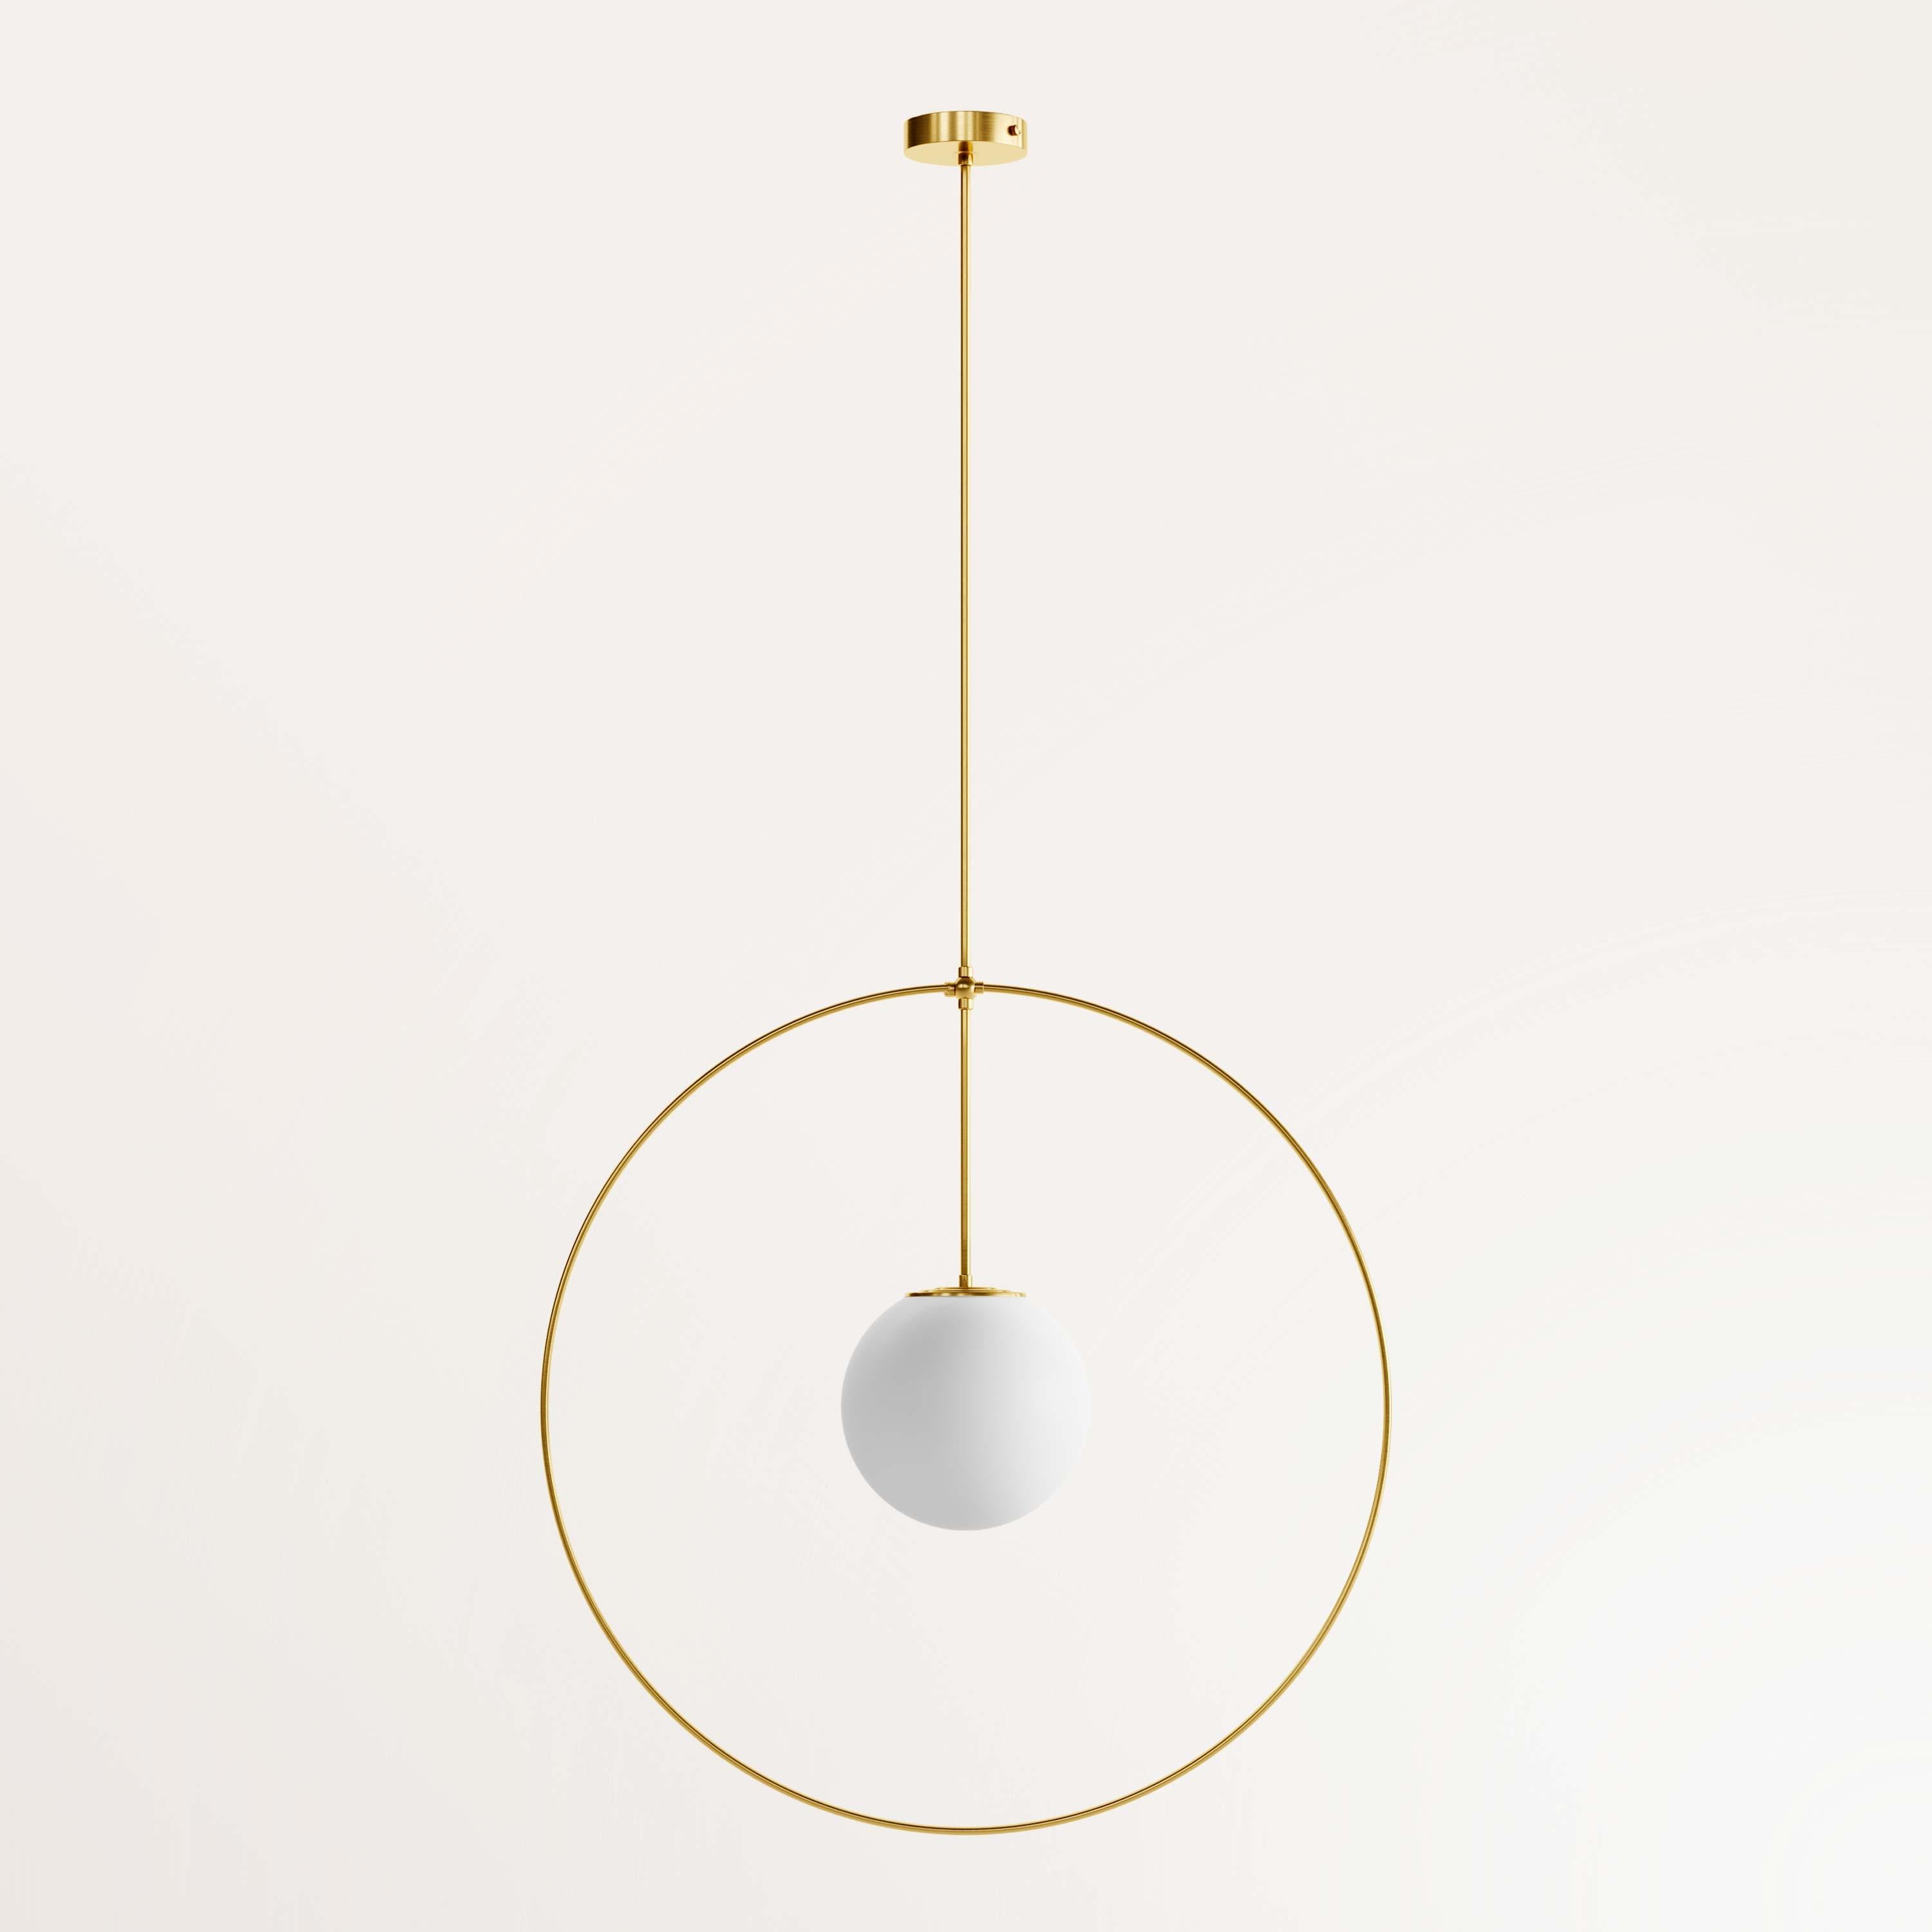 Handmade small helios chandelier by Gobo Lights
Dimensions: globe Ø 15 ; Ø 45 ; 100 H 
Materials: Brass, opaline

Goddess with three light heads 

Self-taught and from the world of chemistry, this Belgian craftsman / designer designs his